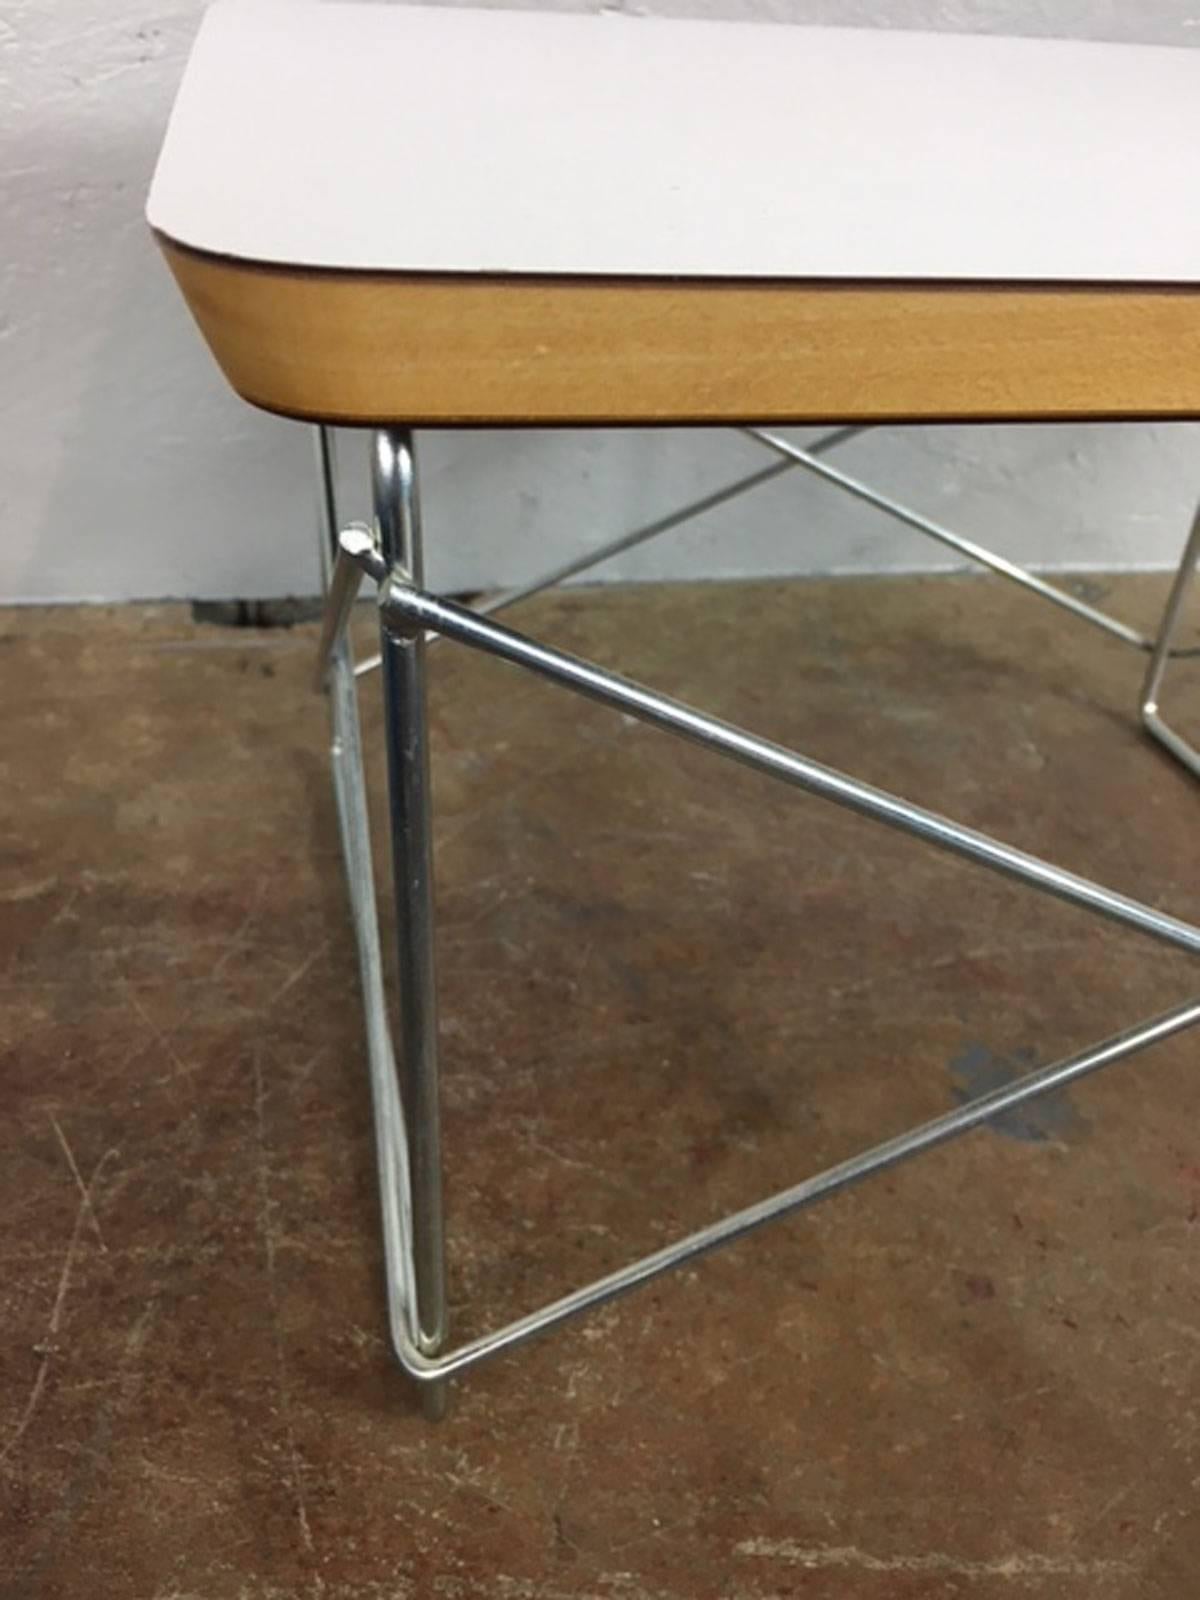 Designed by Charles and Ray Eames in the 1950s, this version of their LTR (Low Table Rod) was produced by Herman Miller in the 1970s. The base metal is zinc base. Table has a solid core and a white laminate top.